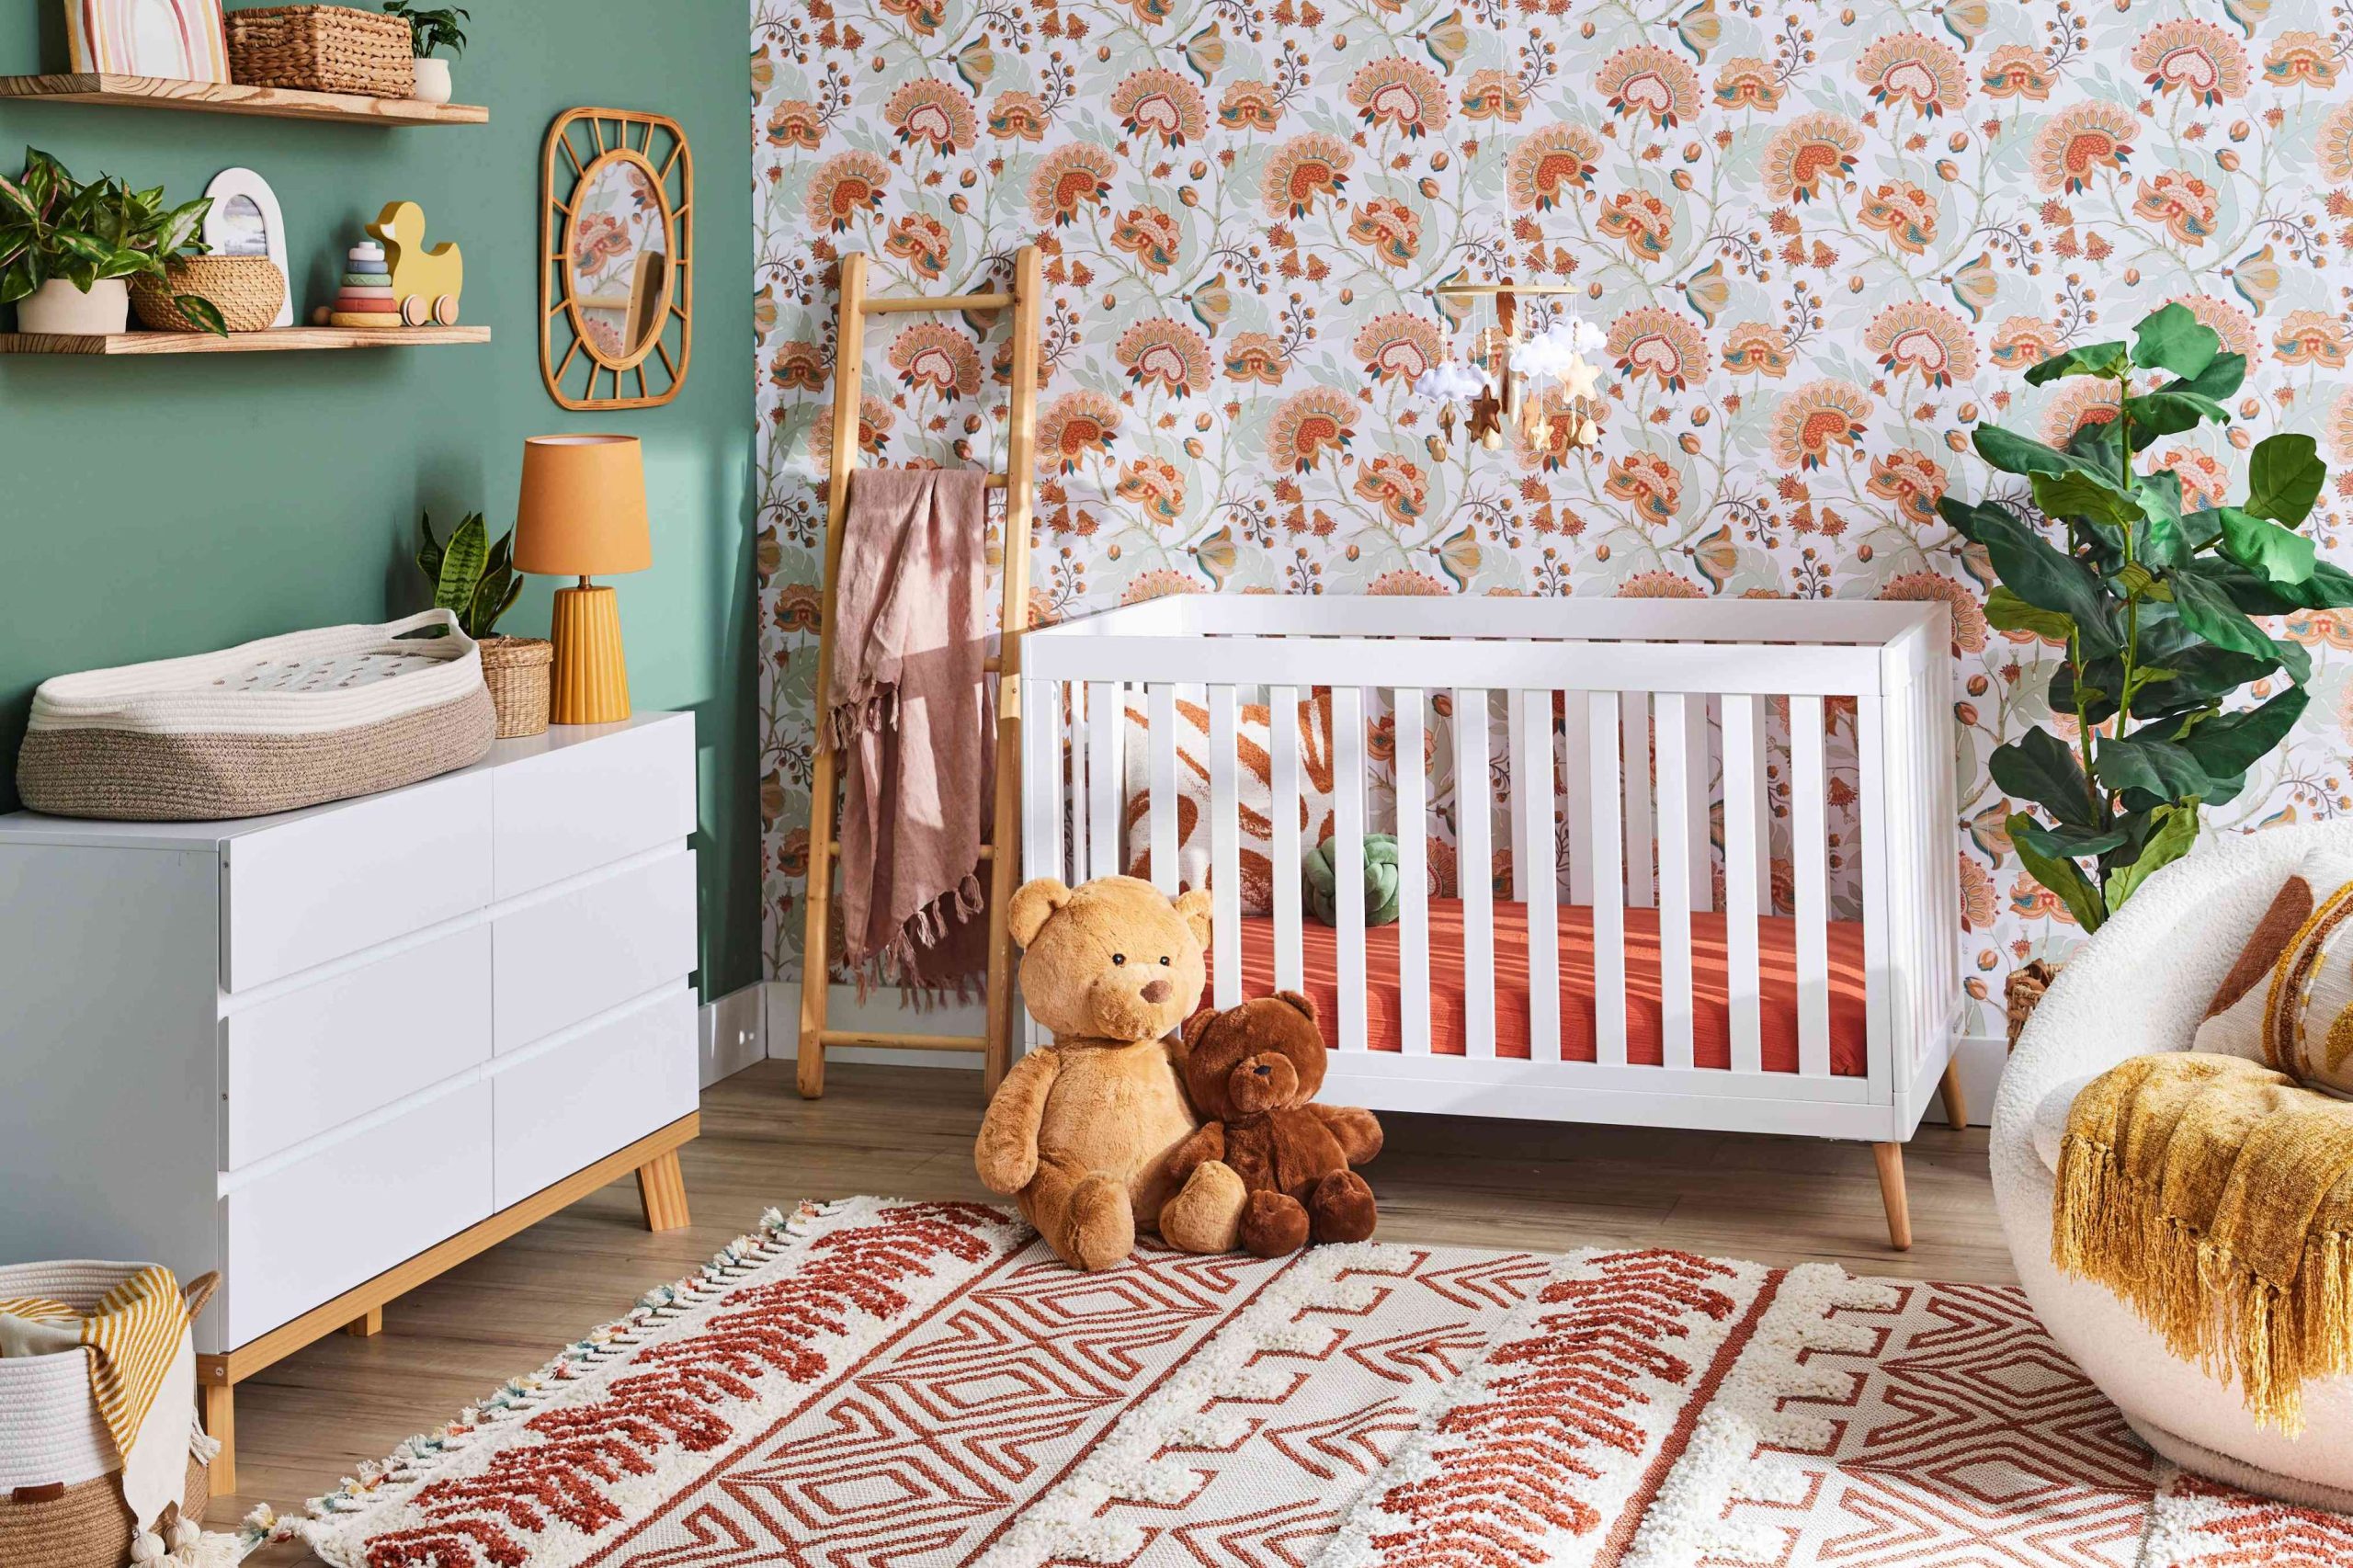 Baby Room Ideas for a Charming, Functional Nursery